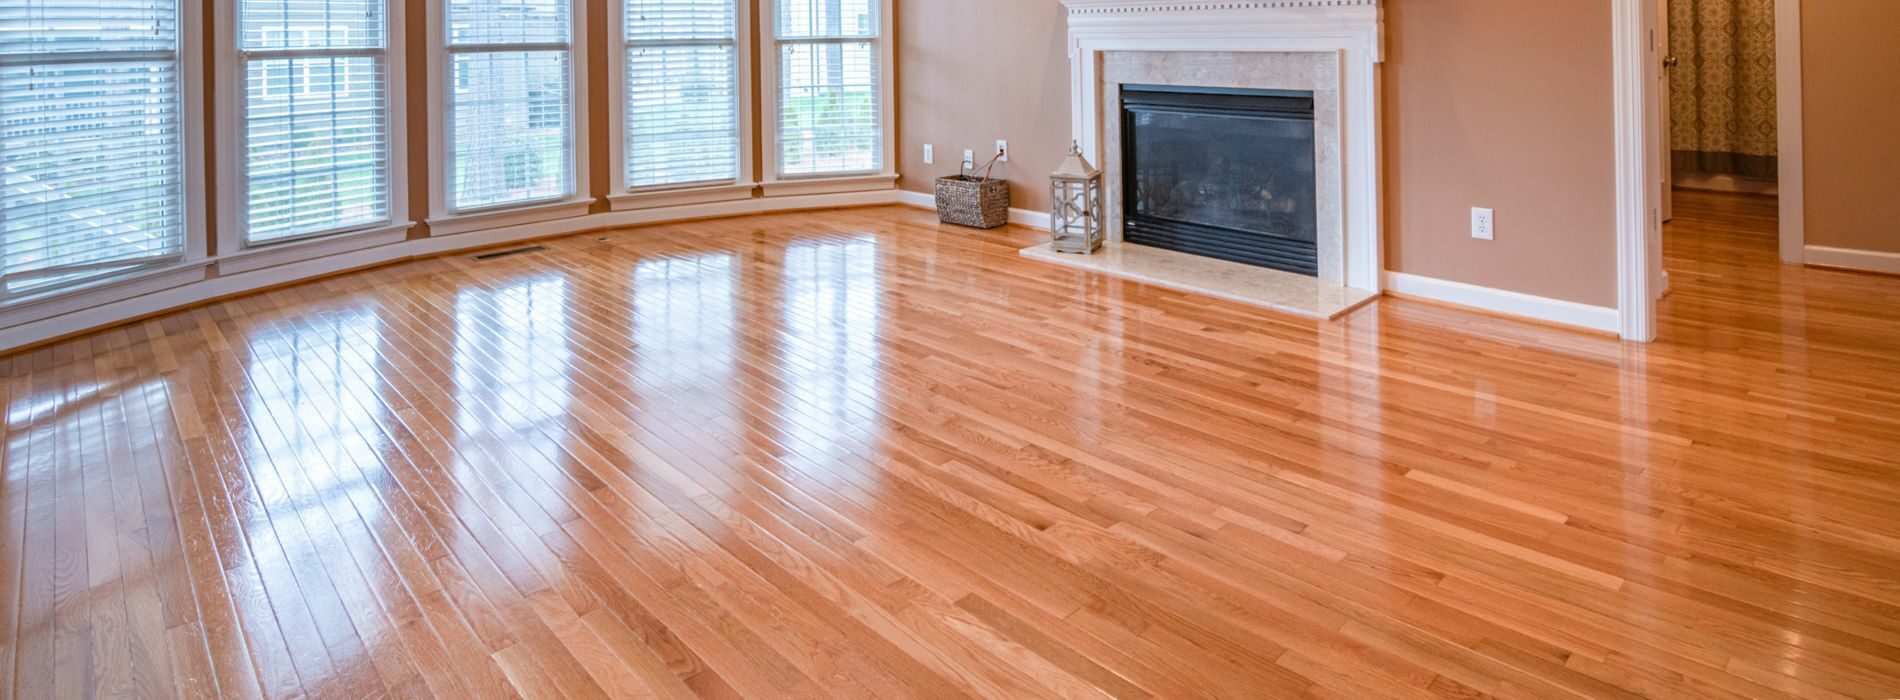 Expertly restored 7-year-old hardwood floor in Rush Green, RM7. Bona 2.2K Frost whitewashing and Traffic HD 15% sheen matte lacquer were used by Mr Sander®. The durable and stunning finish ensures long-lasting beauty.